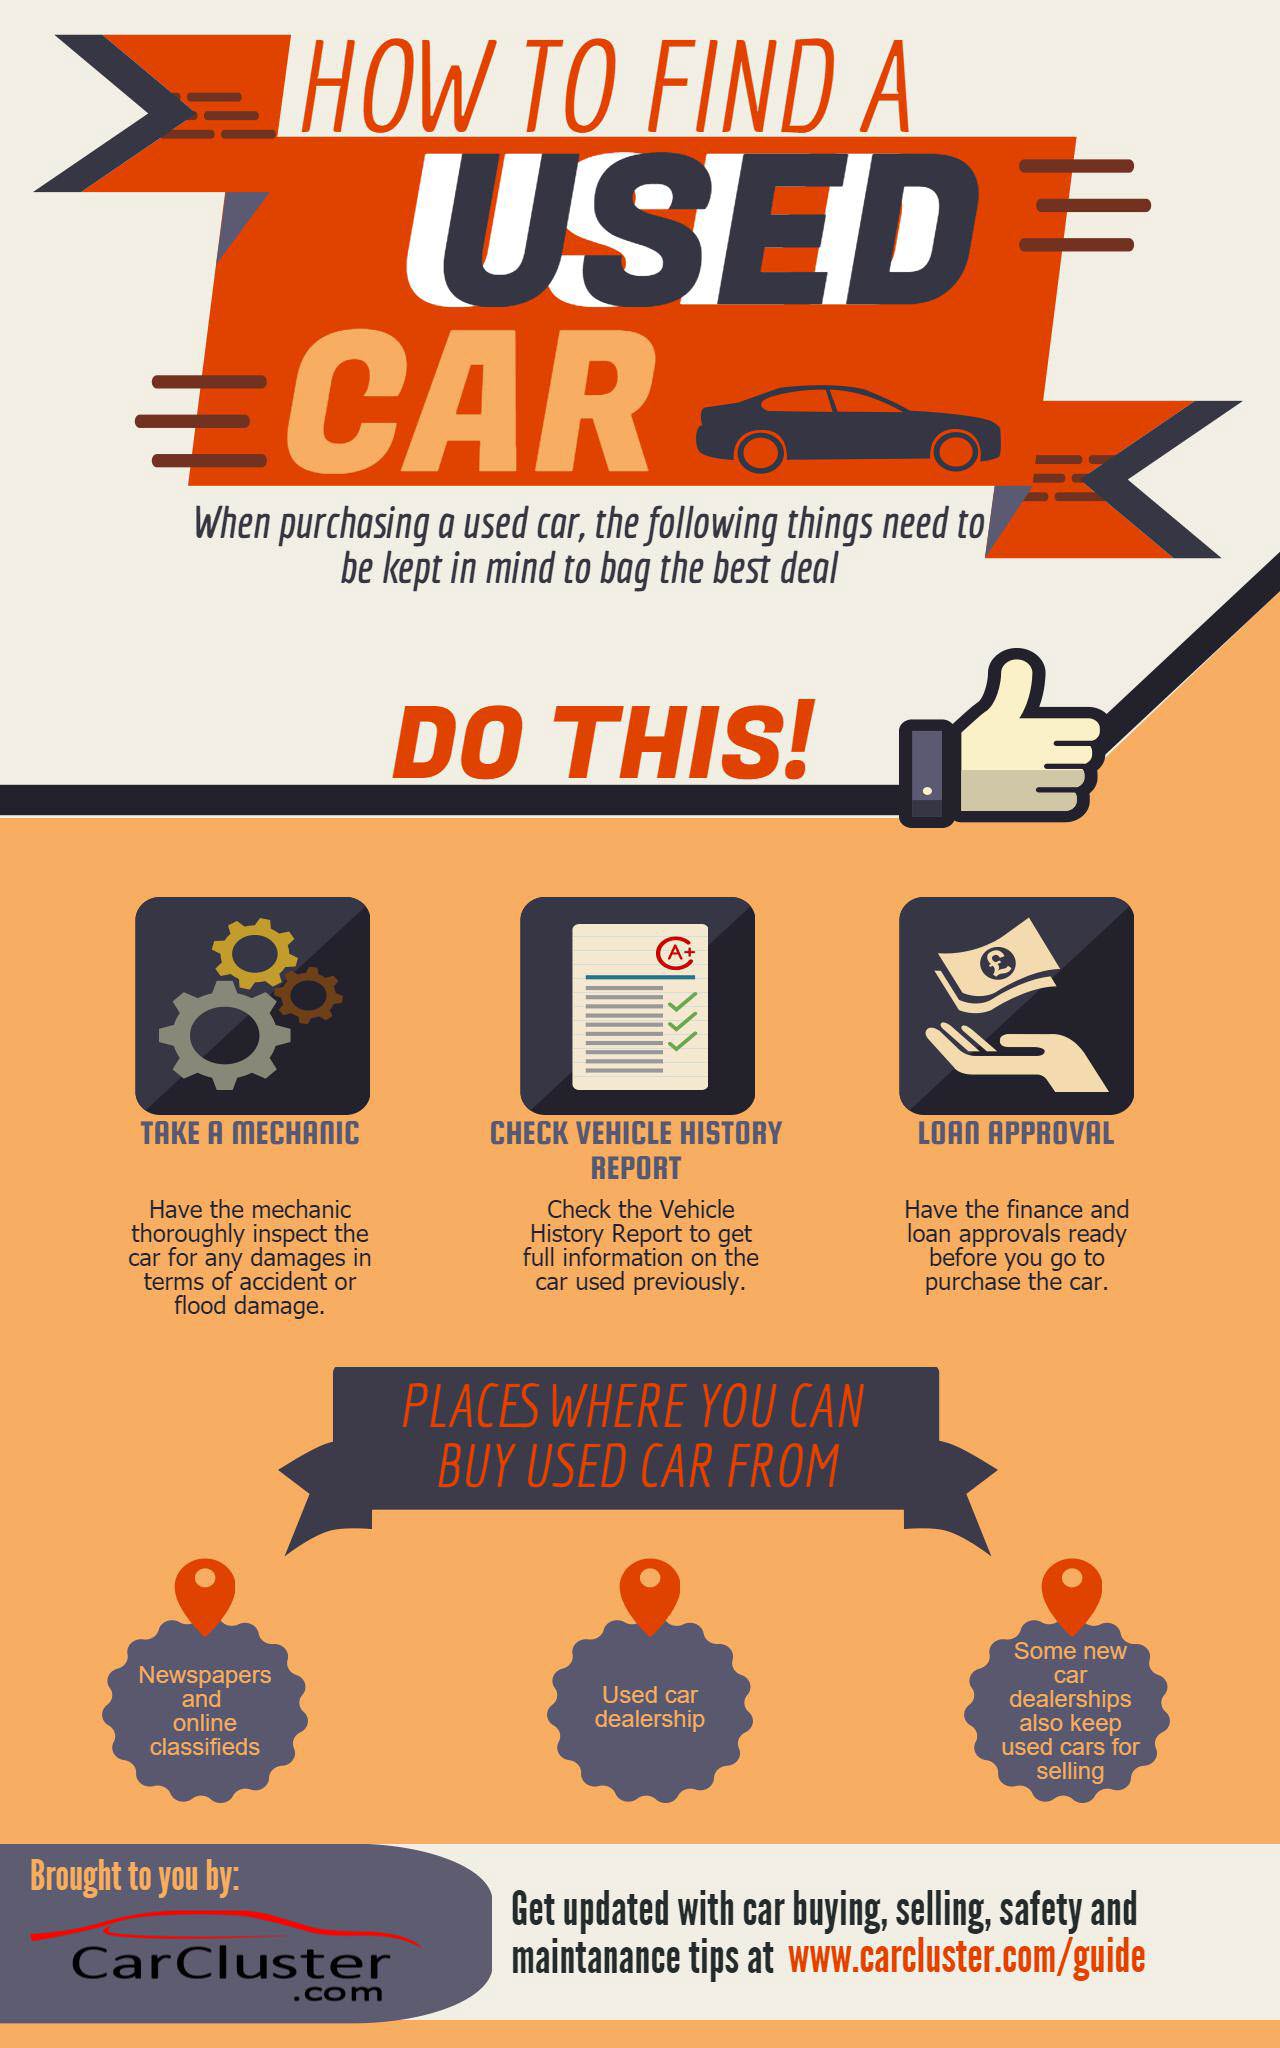 How to find a used car